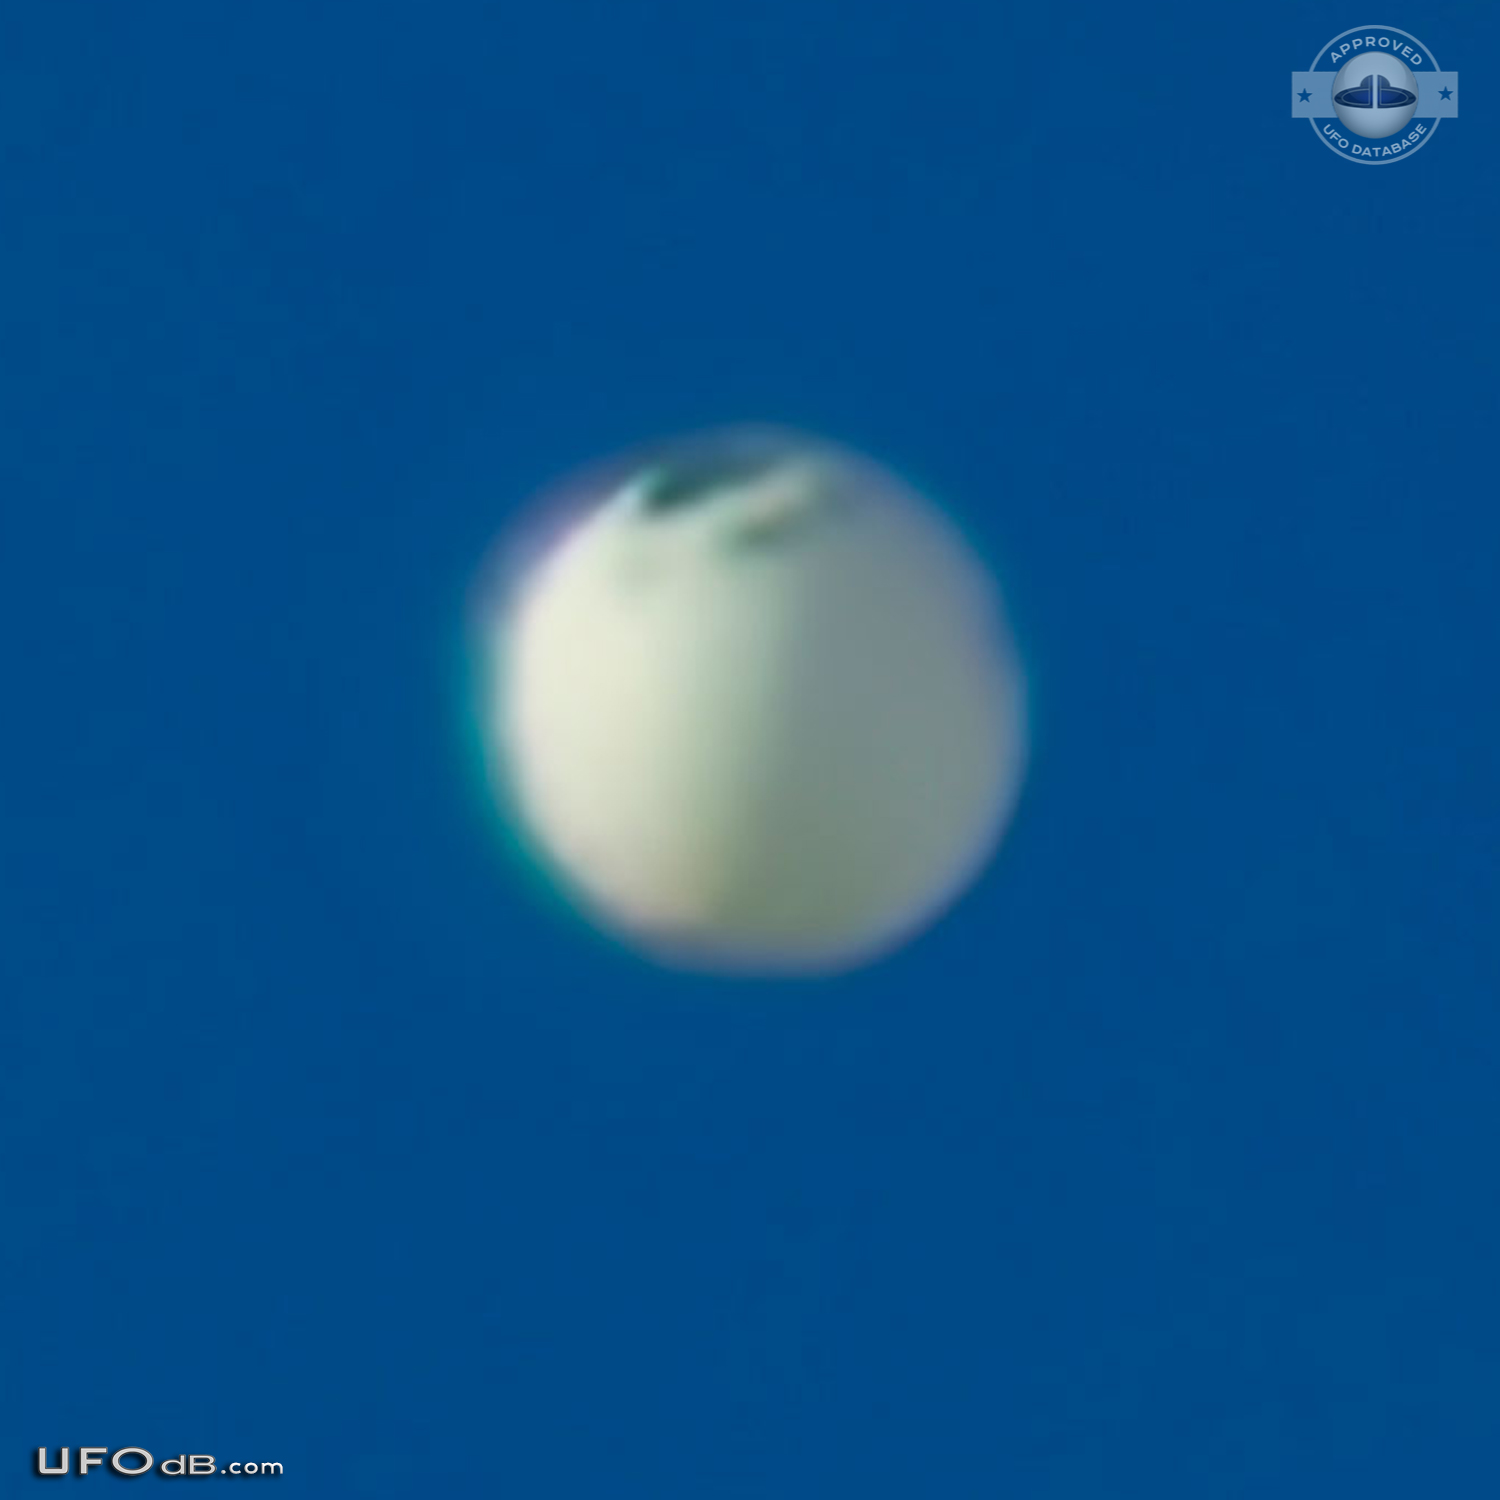 UFO moving fast at high altitude in Avaré, São Paulo, Brazil Jan 2015 UFO Picture #611-5